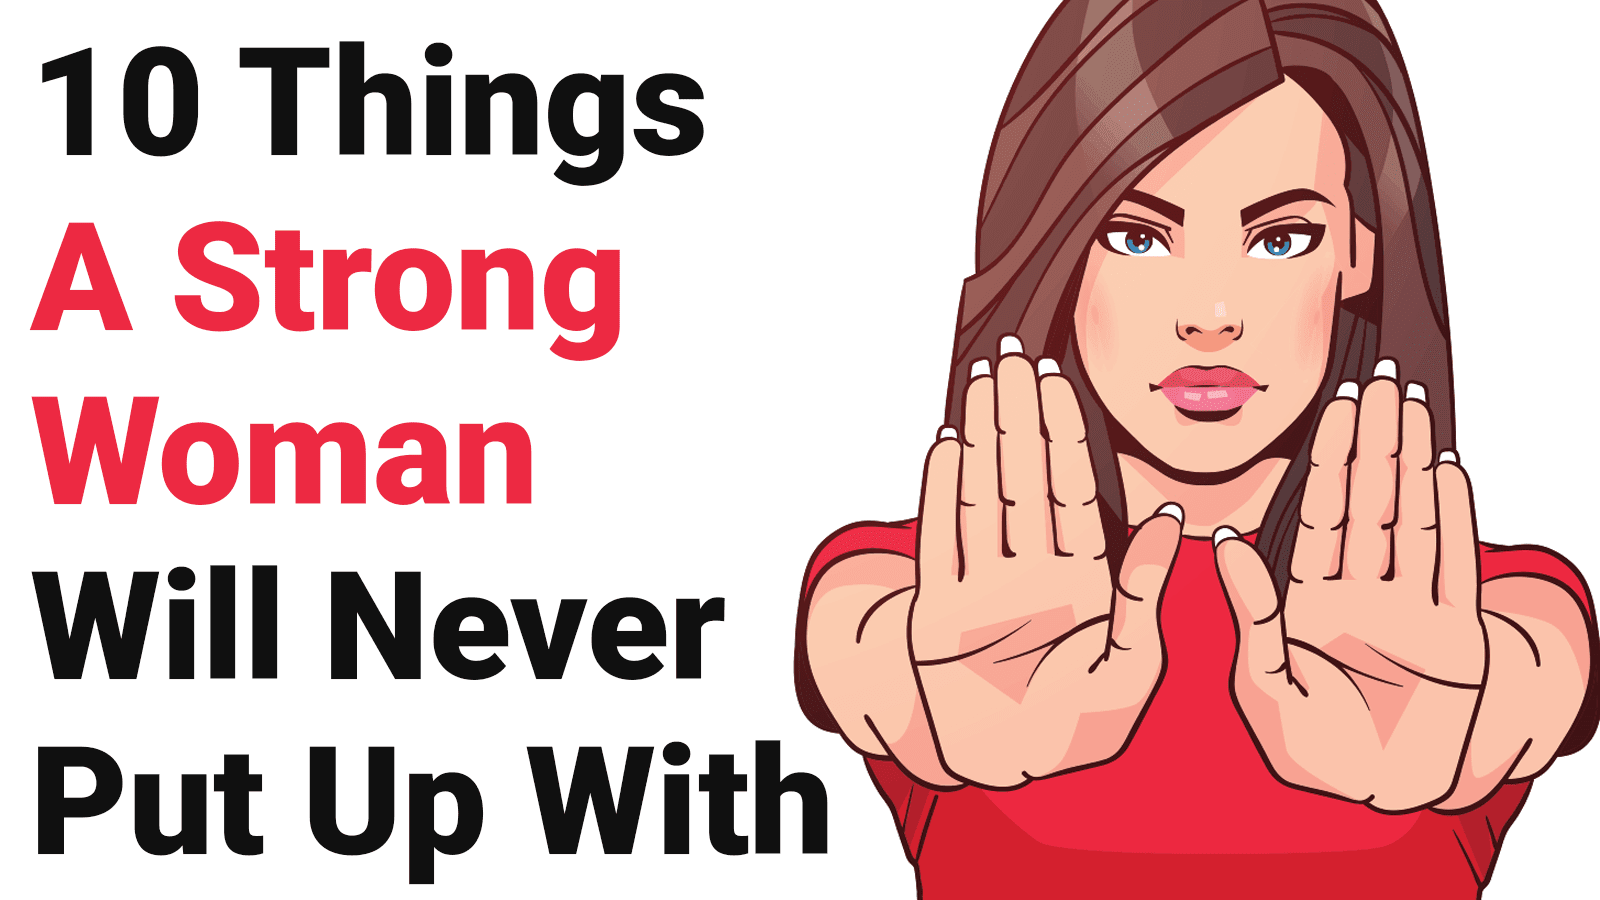 10 Things A Strong Woman Will Never Put Up With